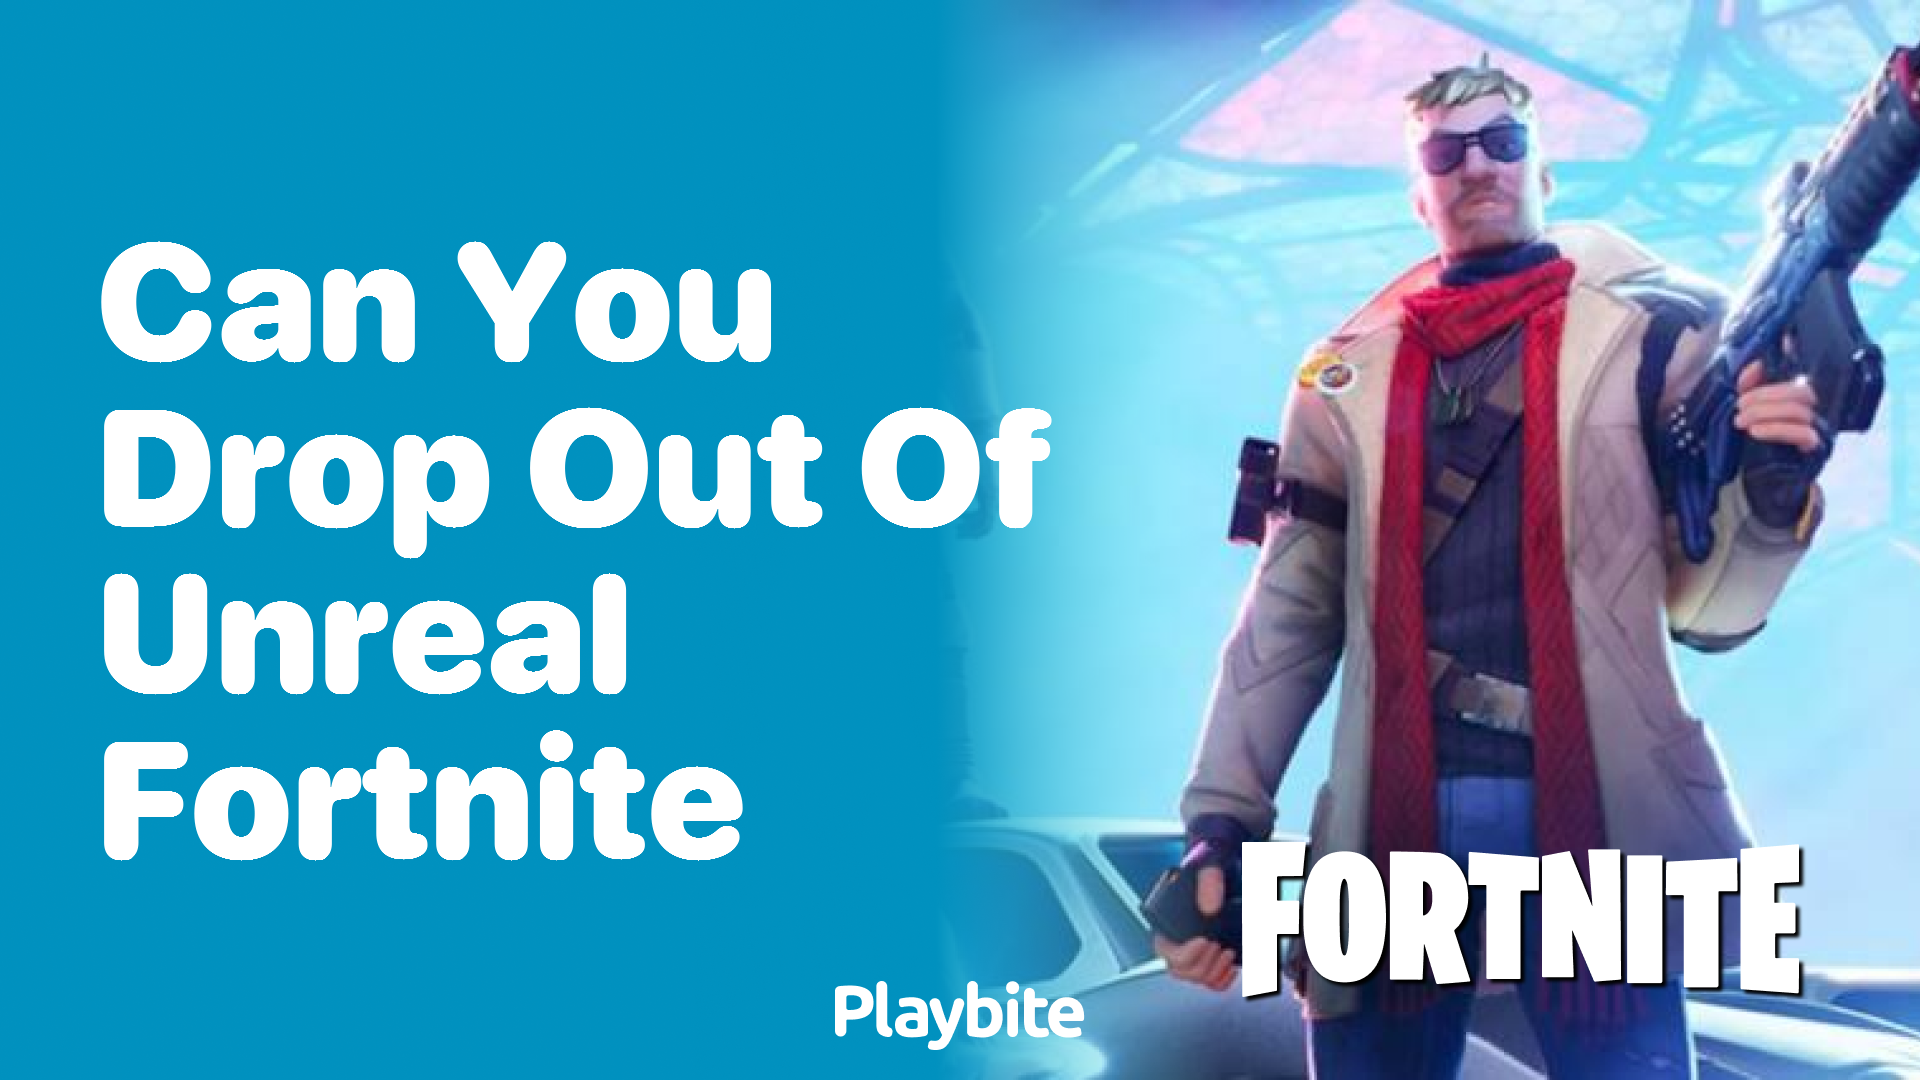 Can You Drop Out of Unreal Fortnite?